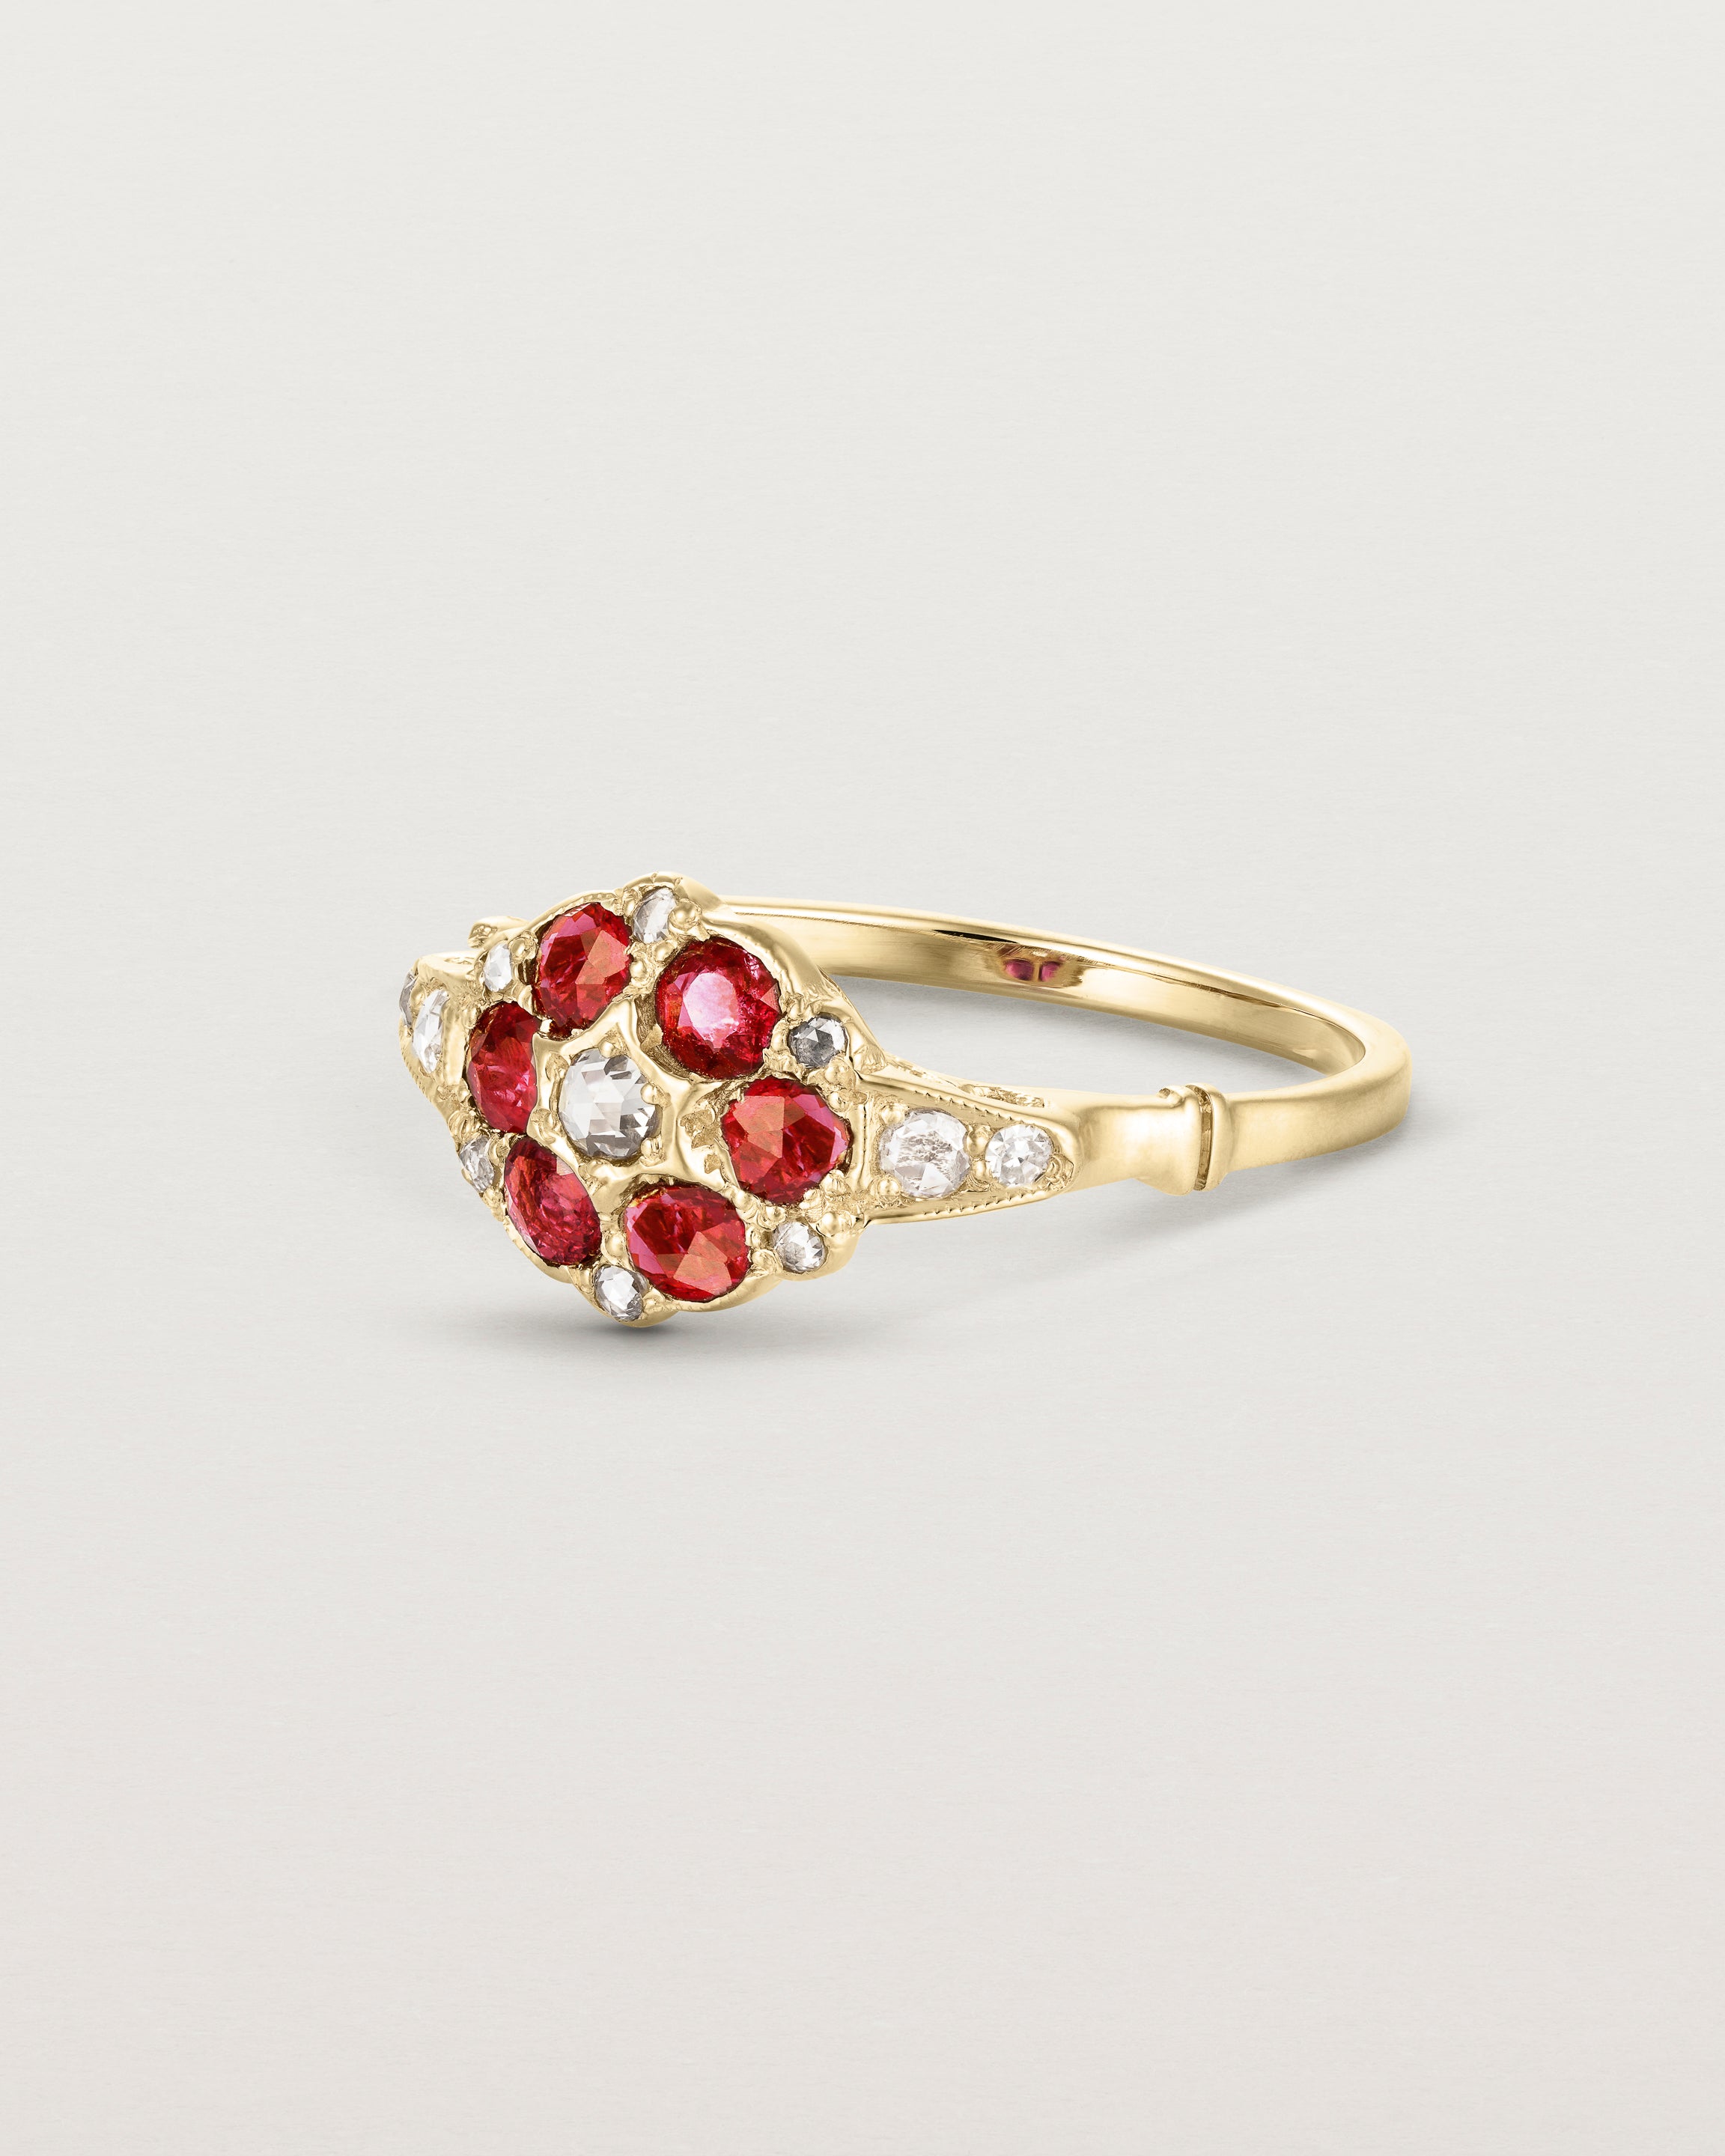 Angle view of the Polly Vintage Ring | Ruby & Diamonds.